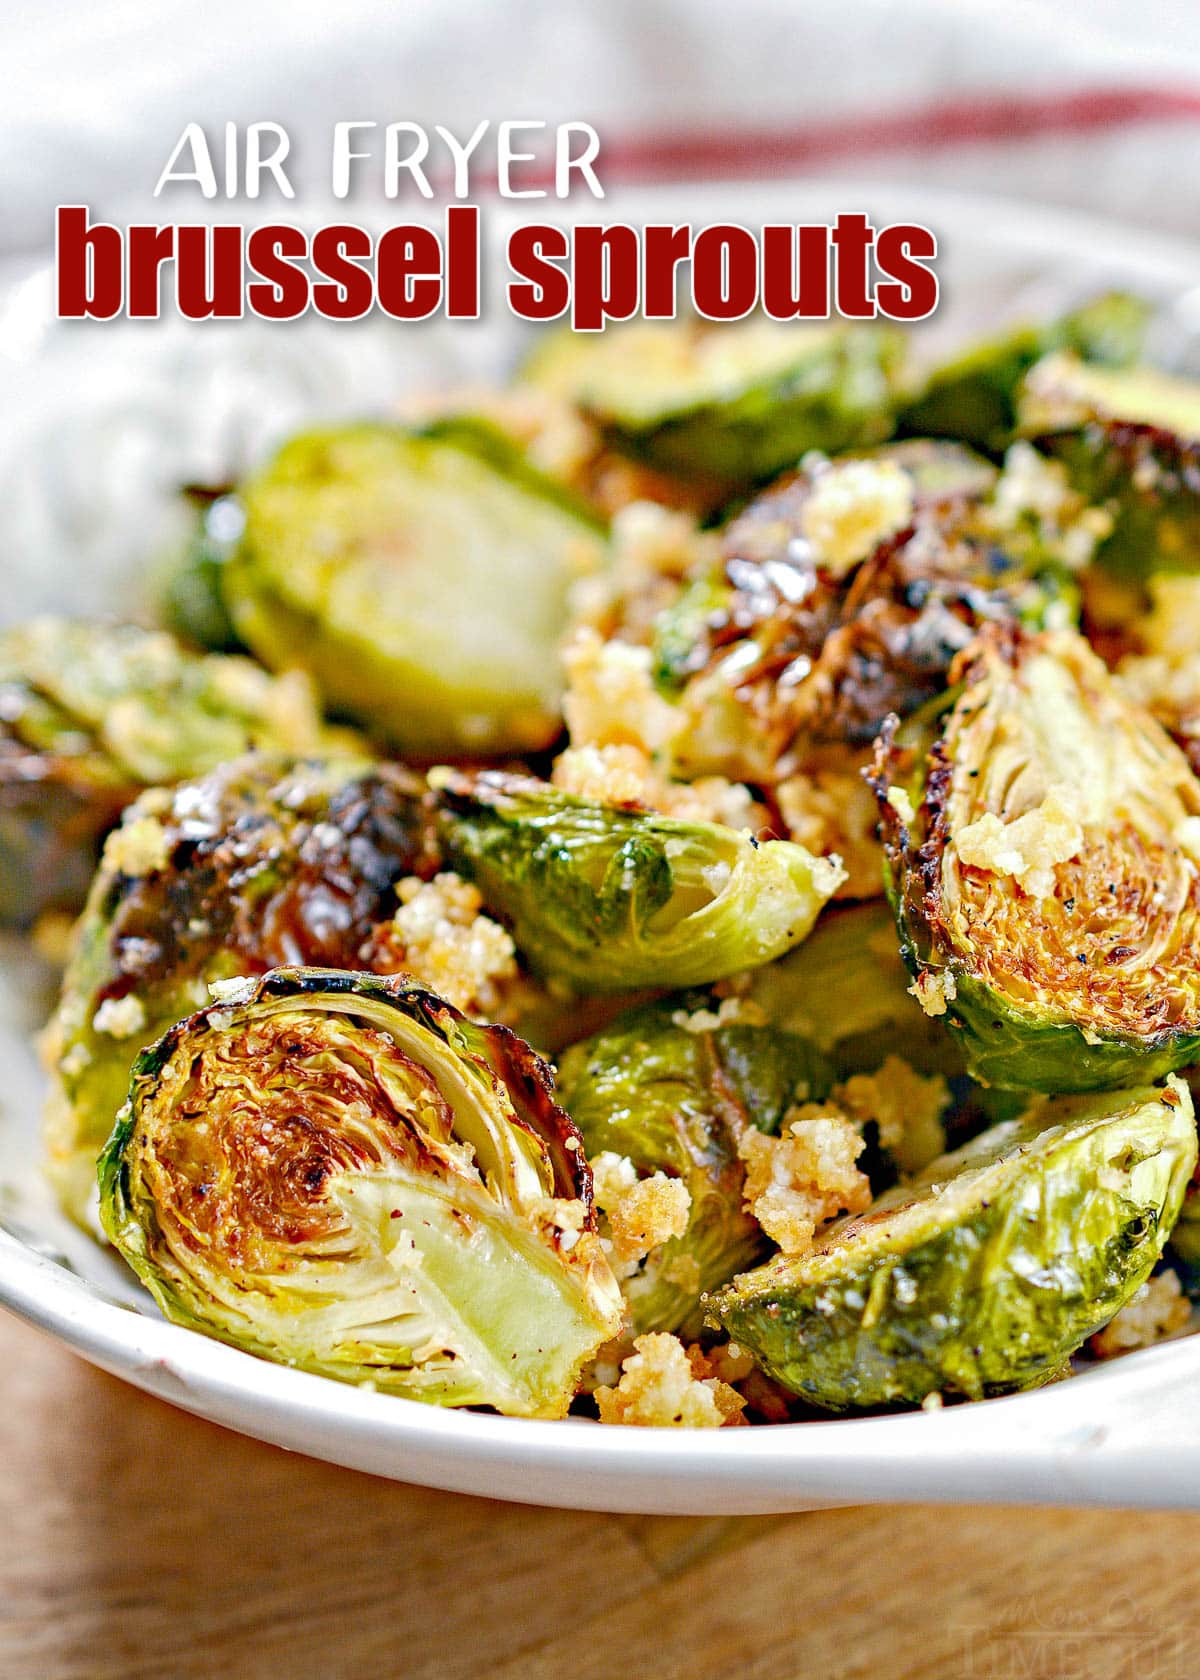 air fryer brussel sprouts in white bowl seasoned with garlic and Parmesan and title overlay at top of image